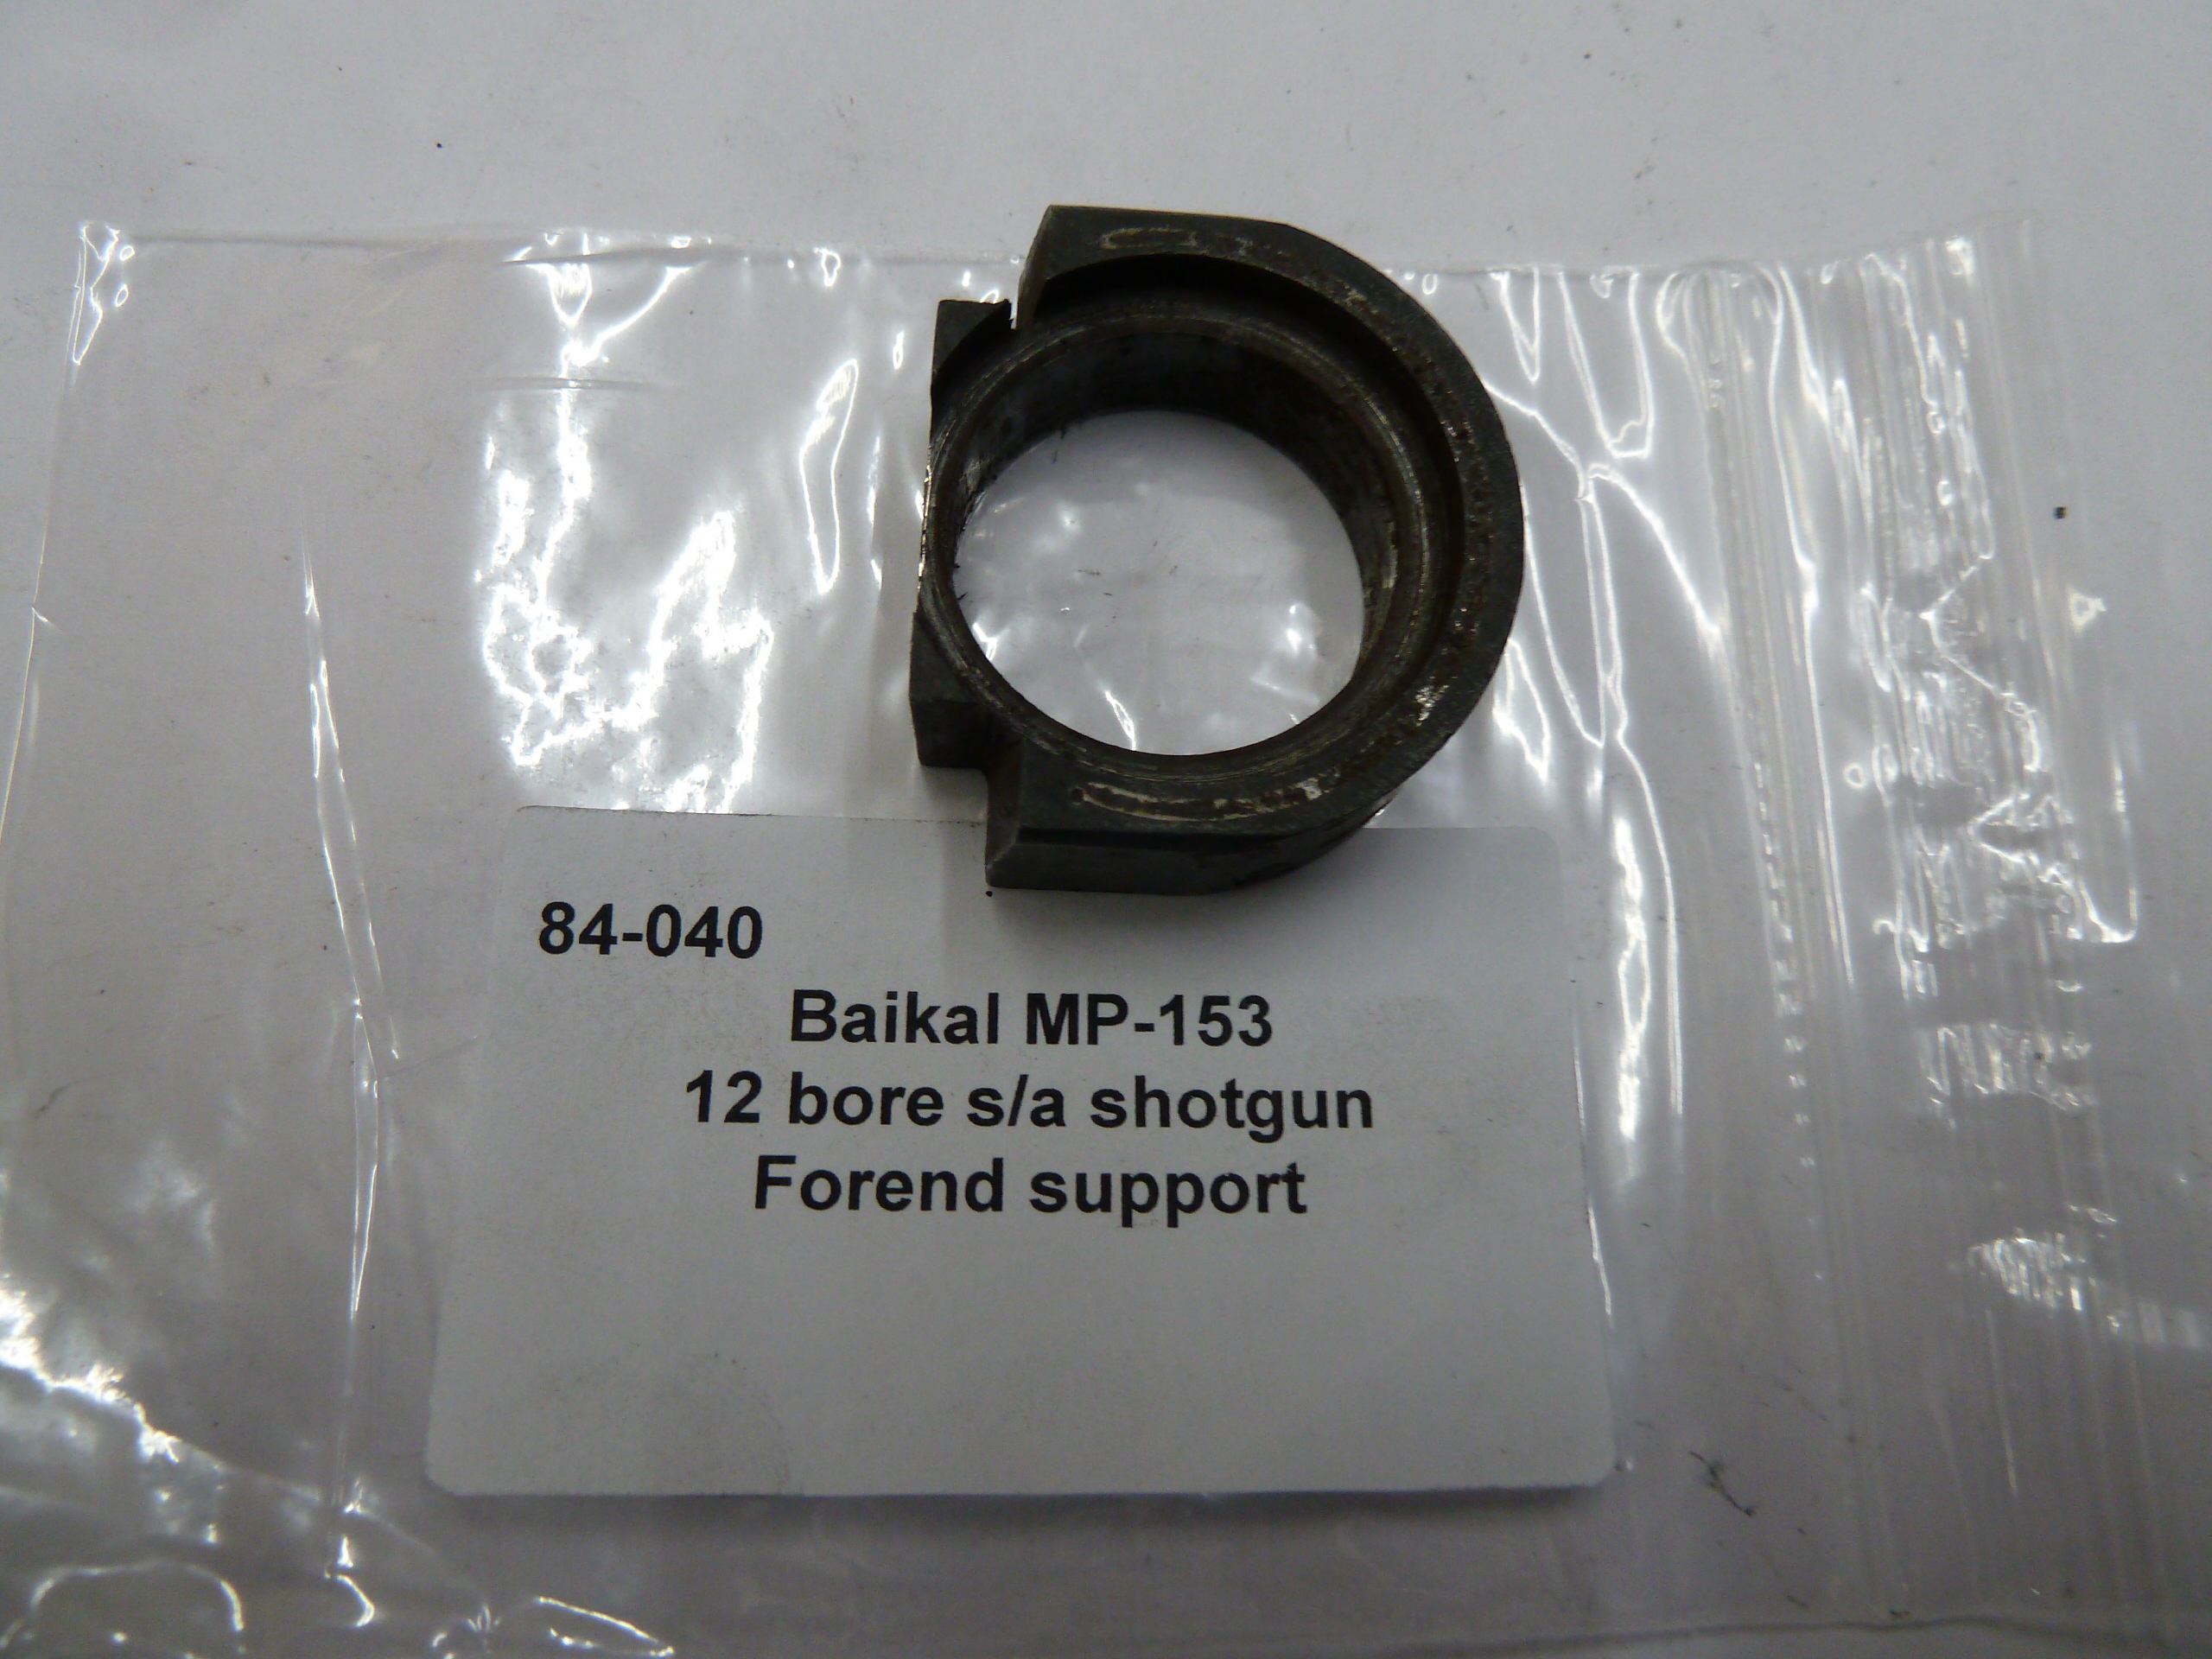 Baikal MP-153 forend support